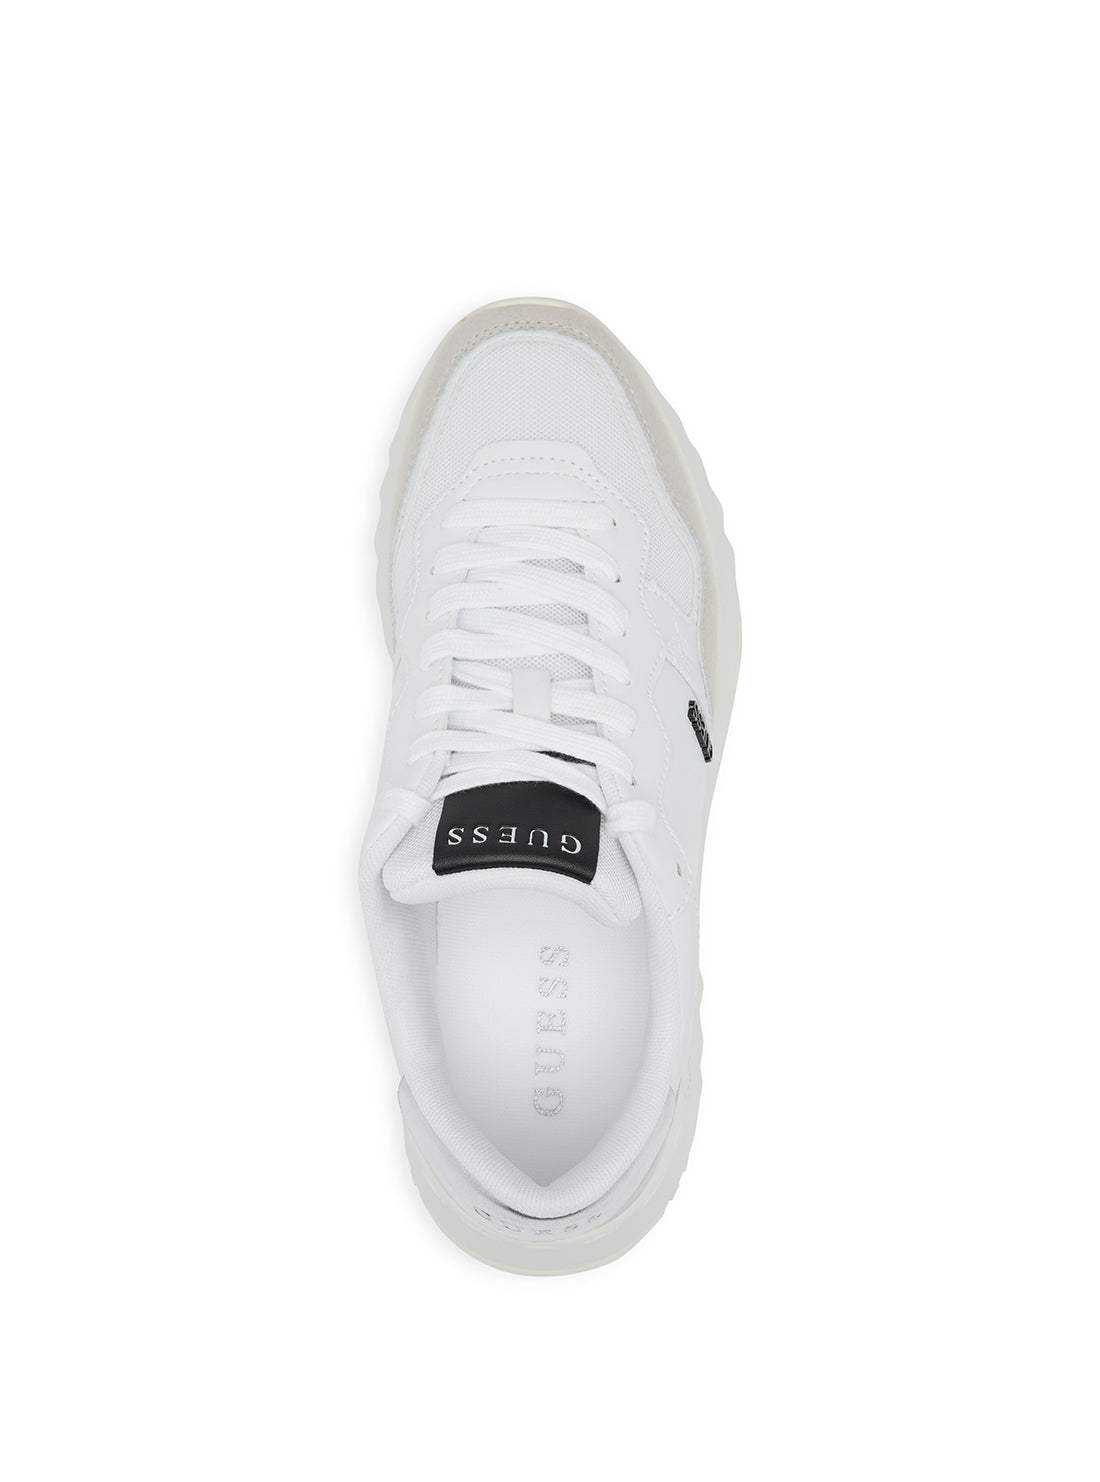 Details 133+ guess white sneakers men latest